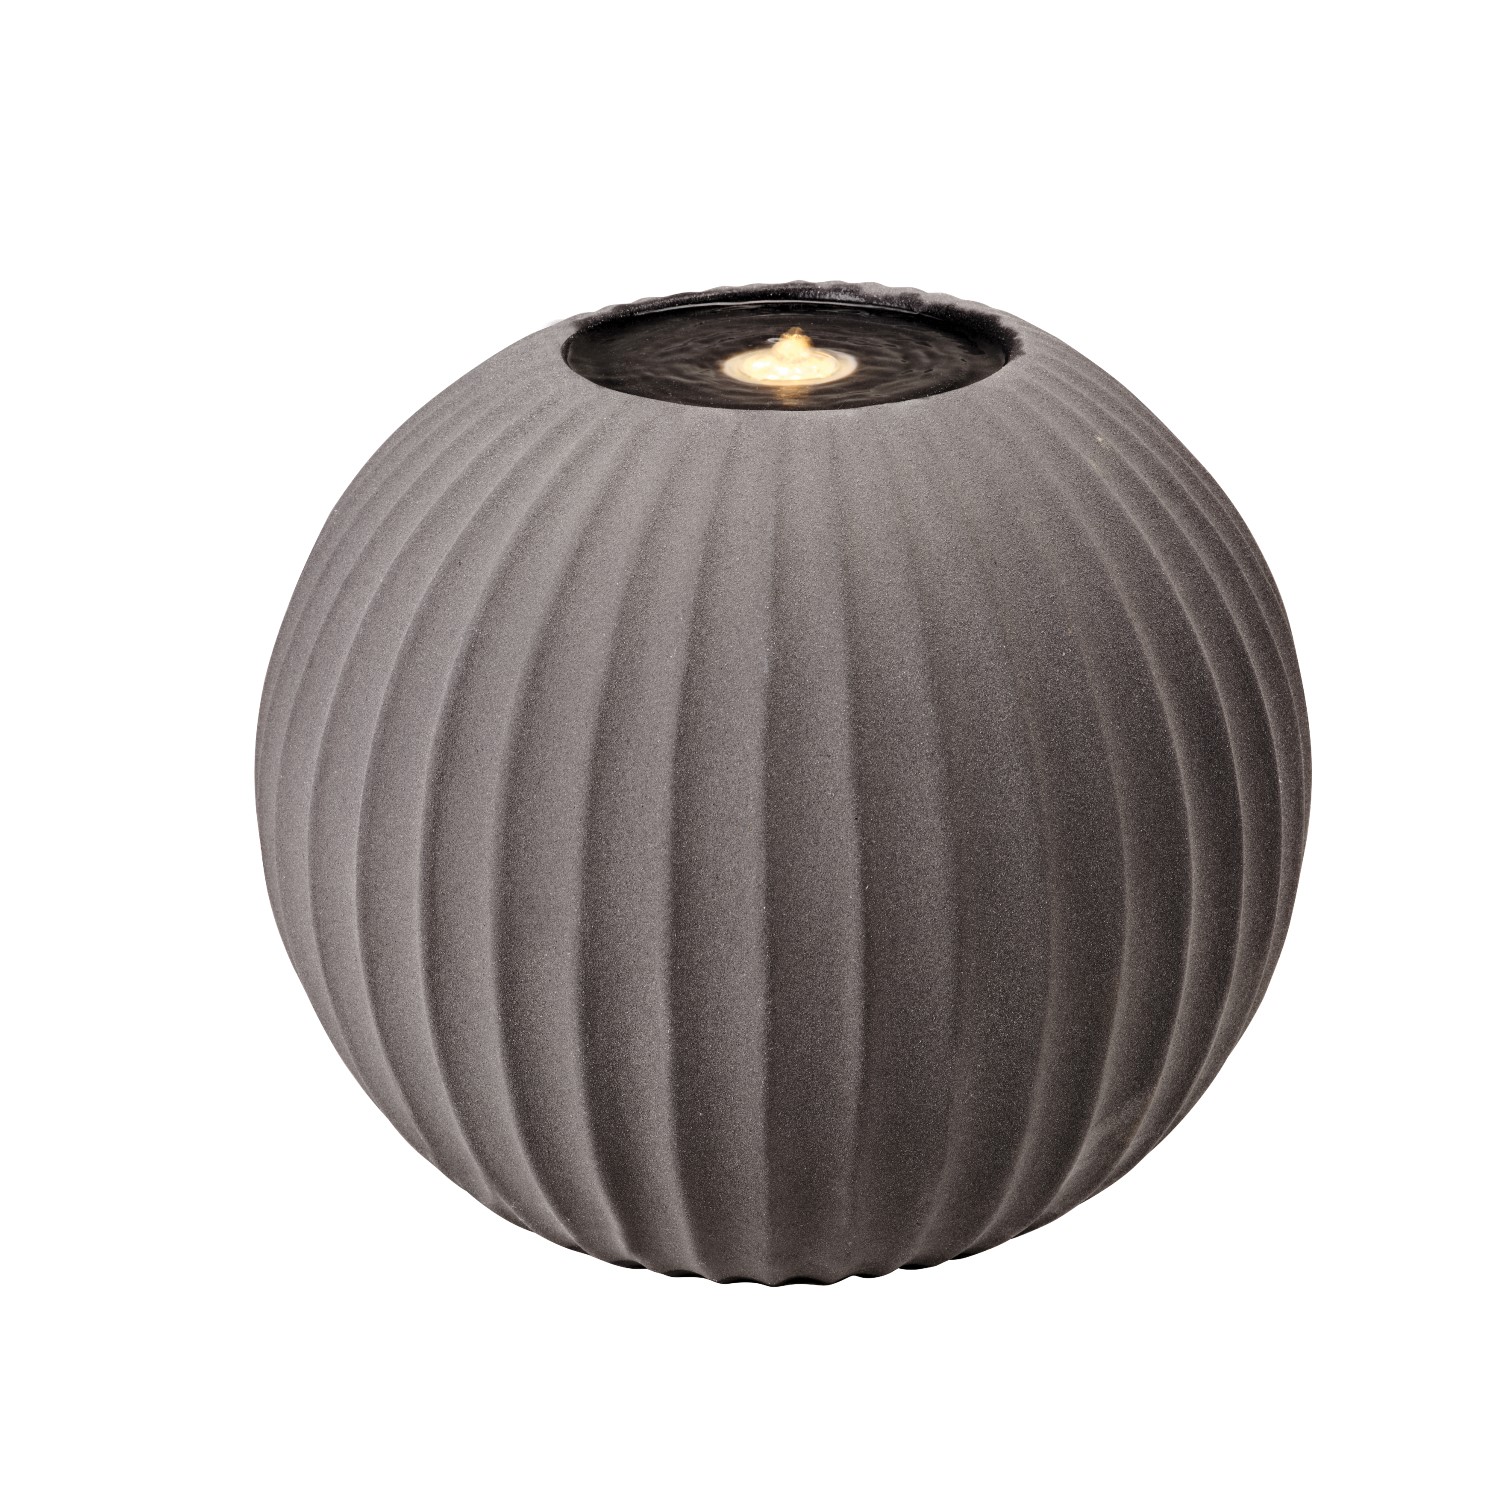 Read more about Matt grey ceramic ball water feature with led lights